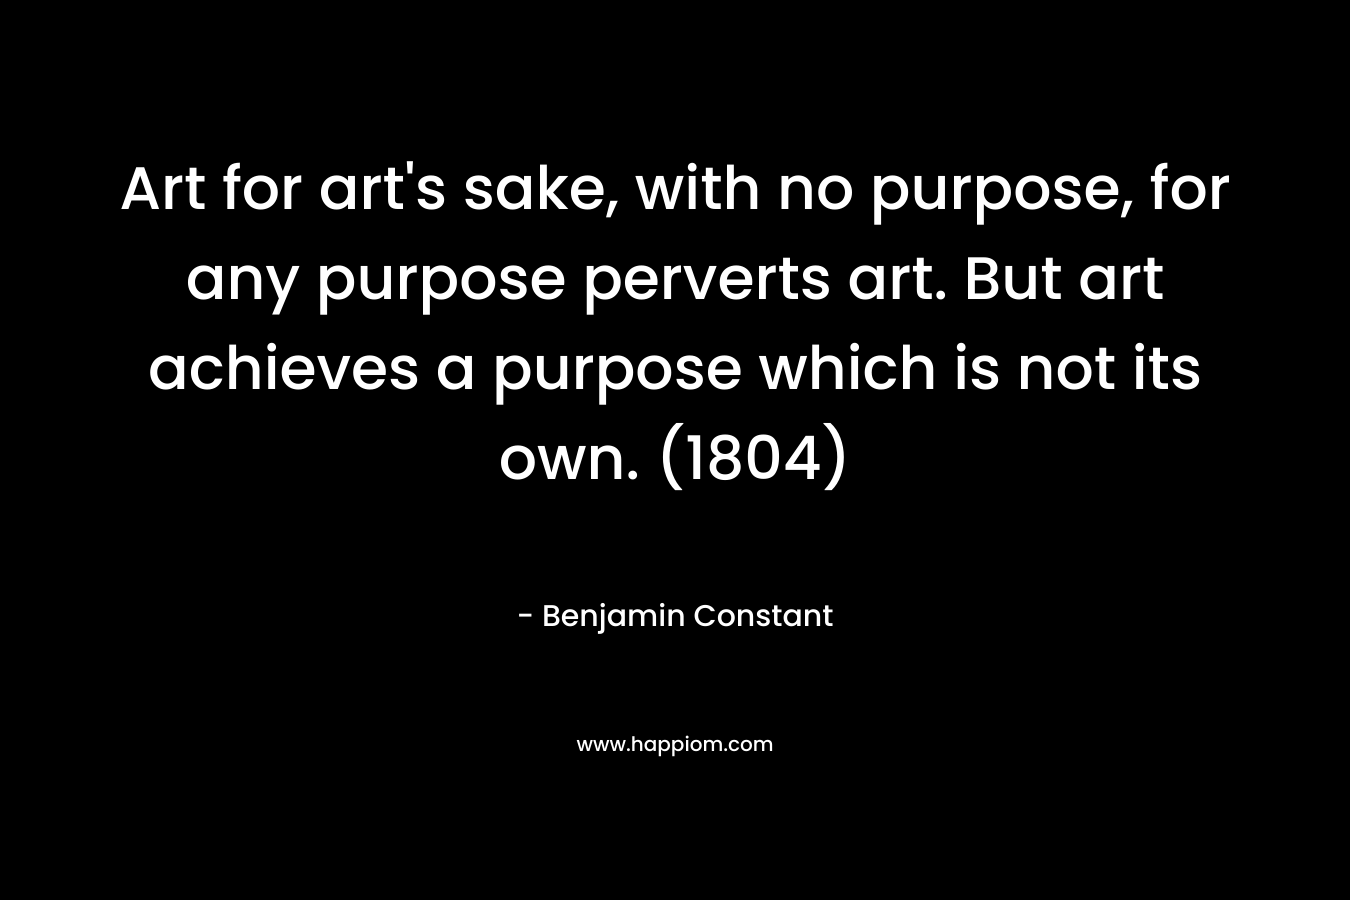 Art for art’s sake, with no purpose, for any purpose perverts art. But art achieves a purpose which is not its own. (1804) – Benjamin Constant